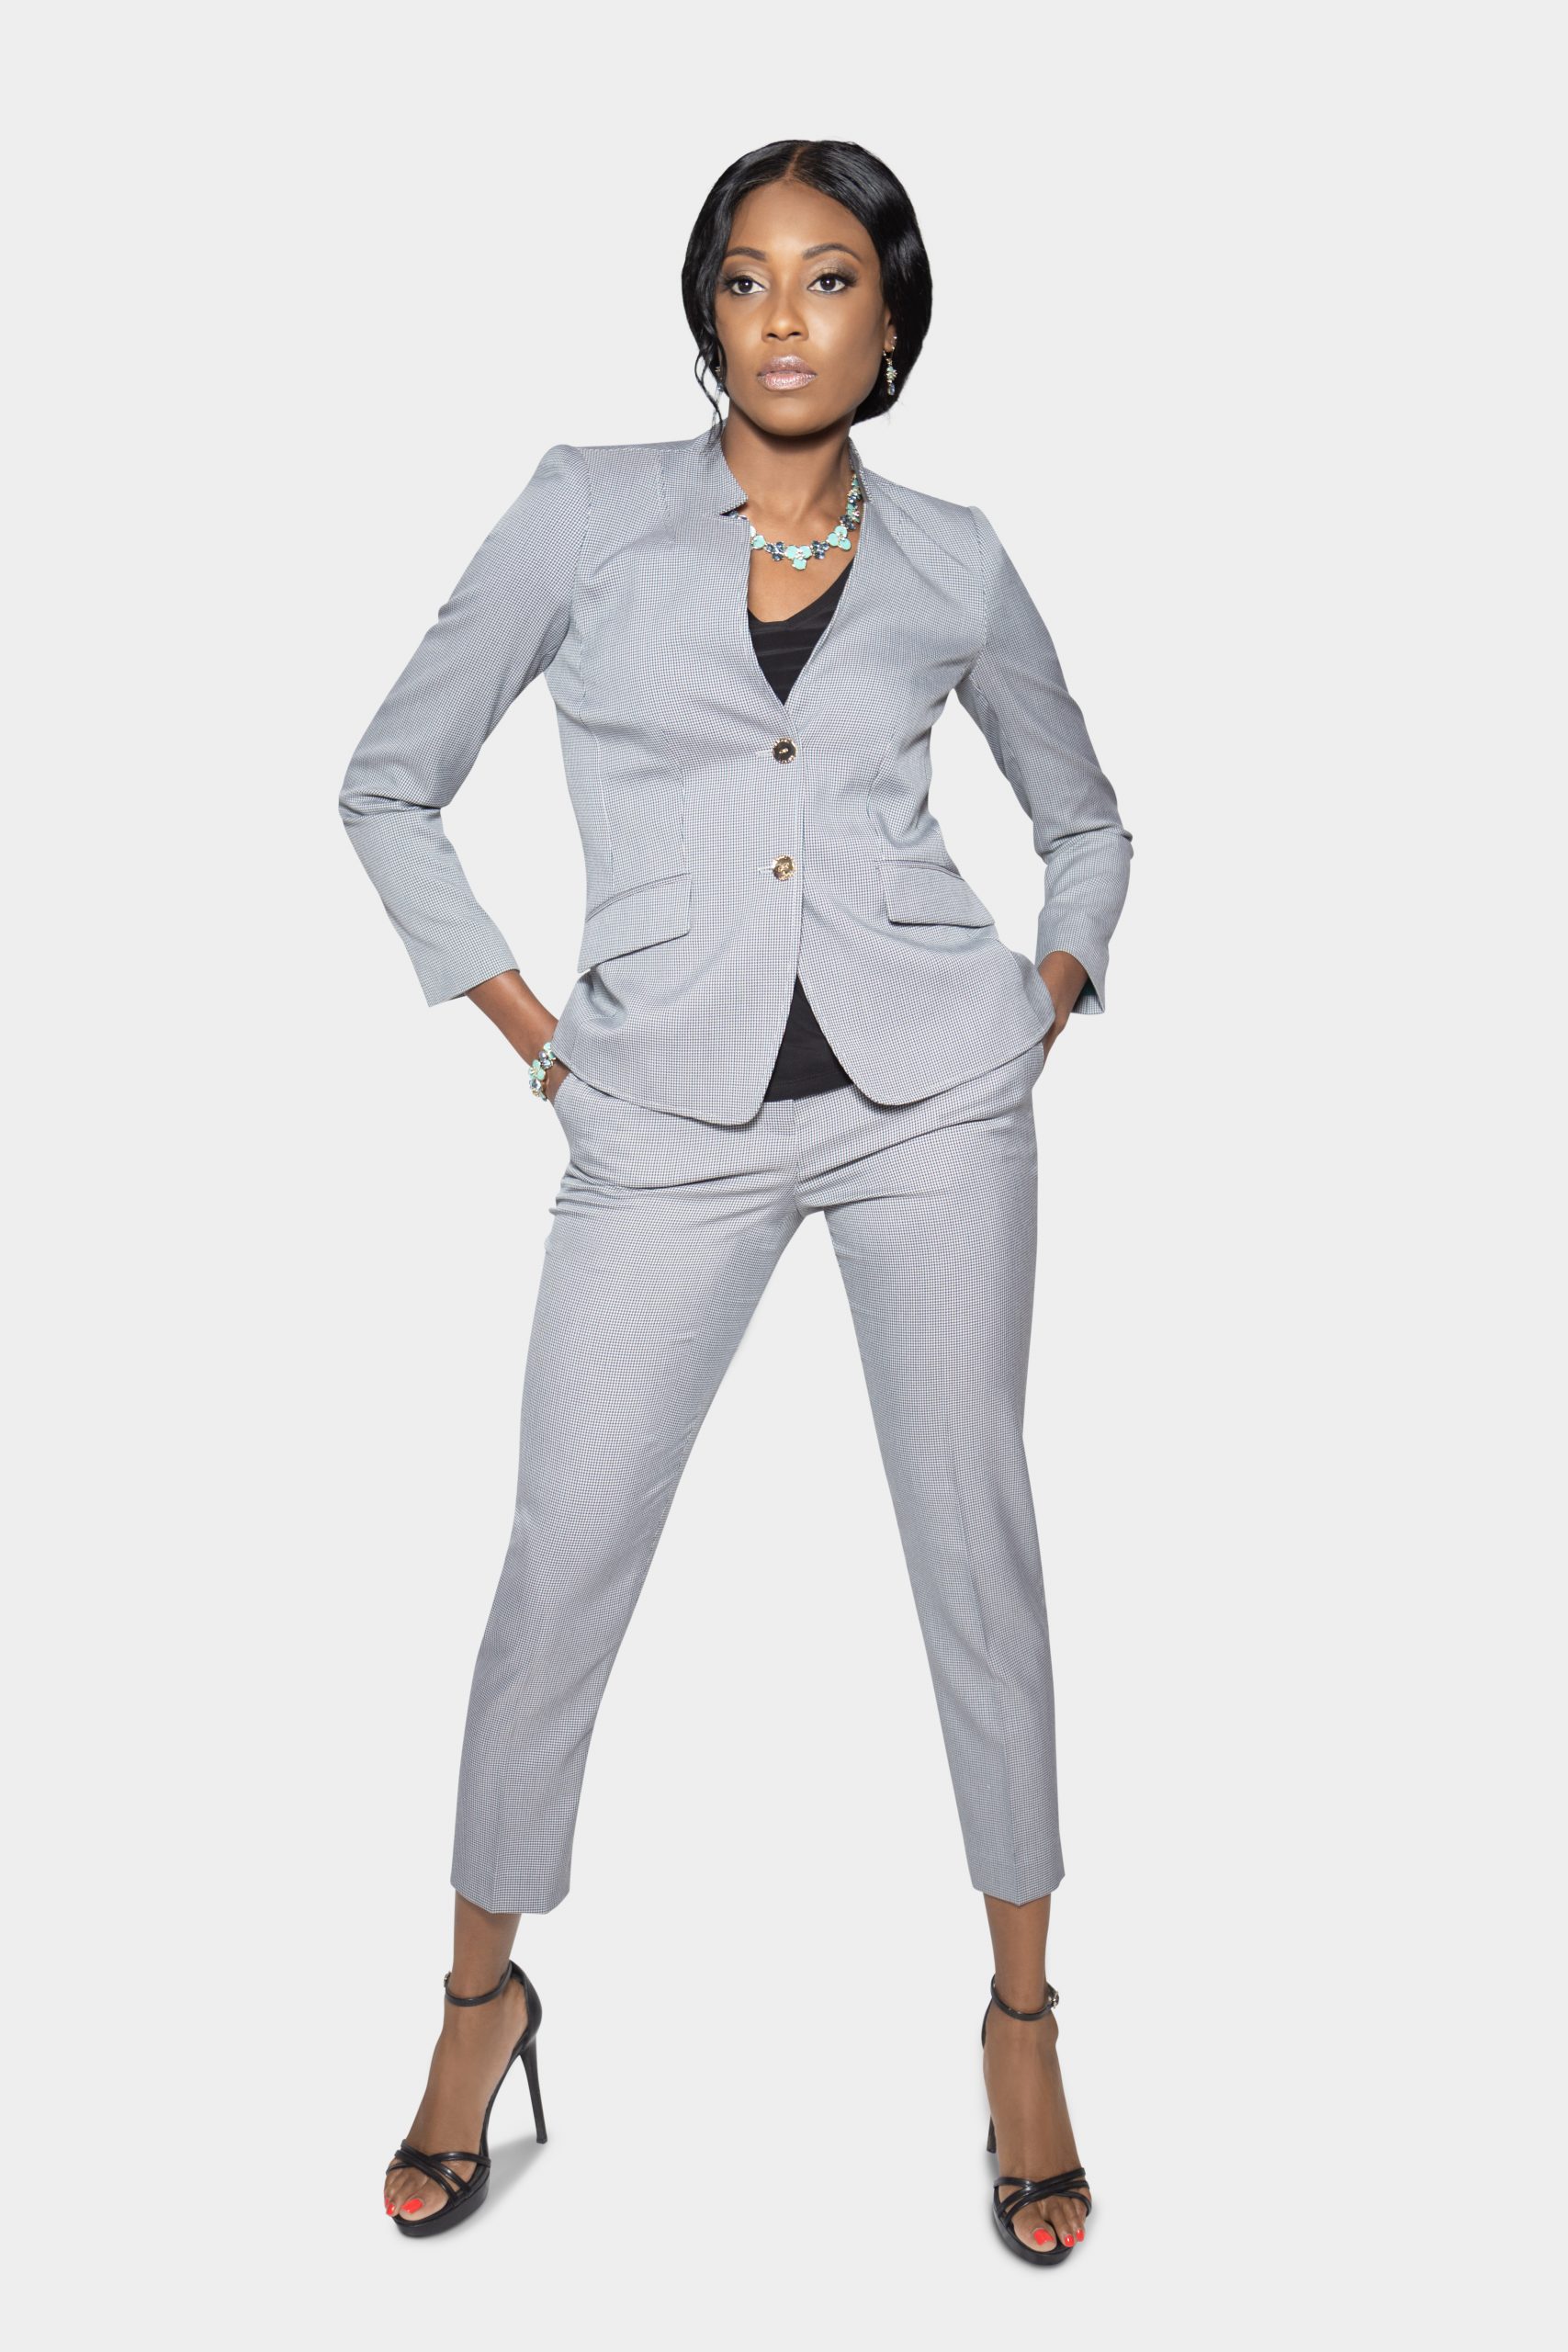 Star Neck Jacket and Ankle Pant Suit - Aarya's Exclusive